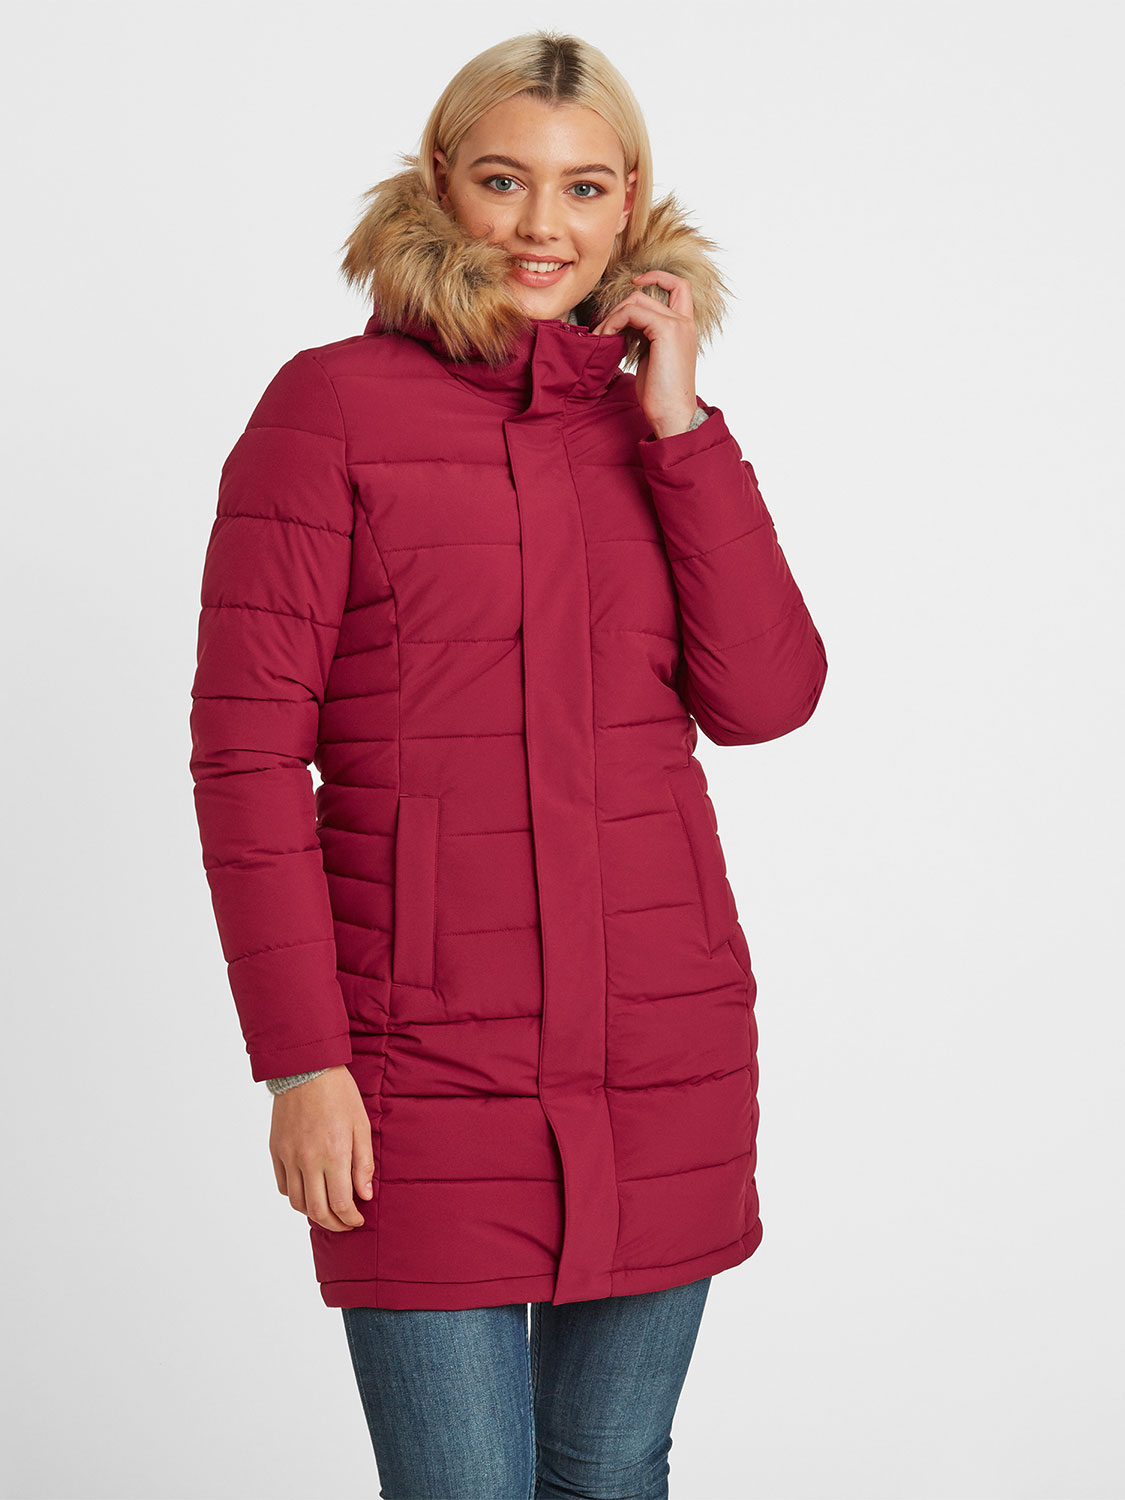 Firbeck Long Insulated Jacket - Size: 8 Pink Tog24